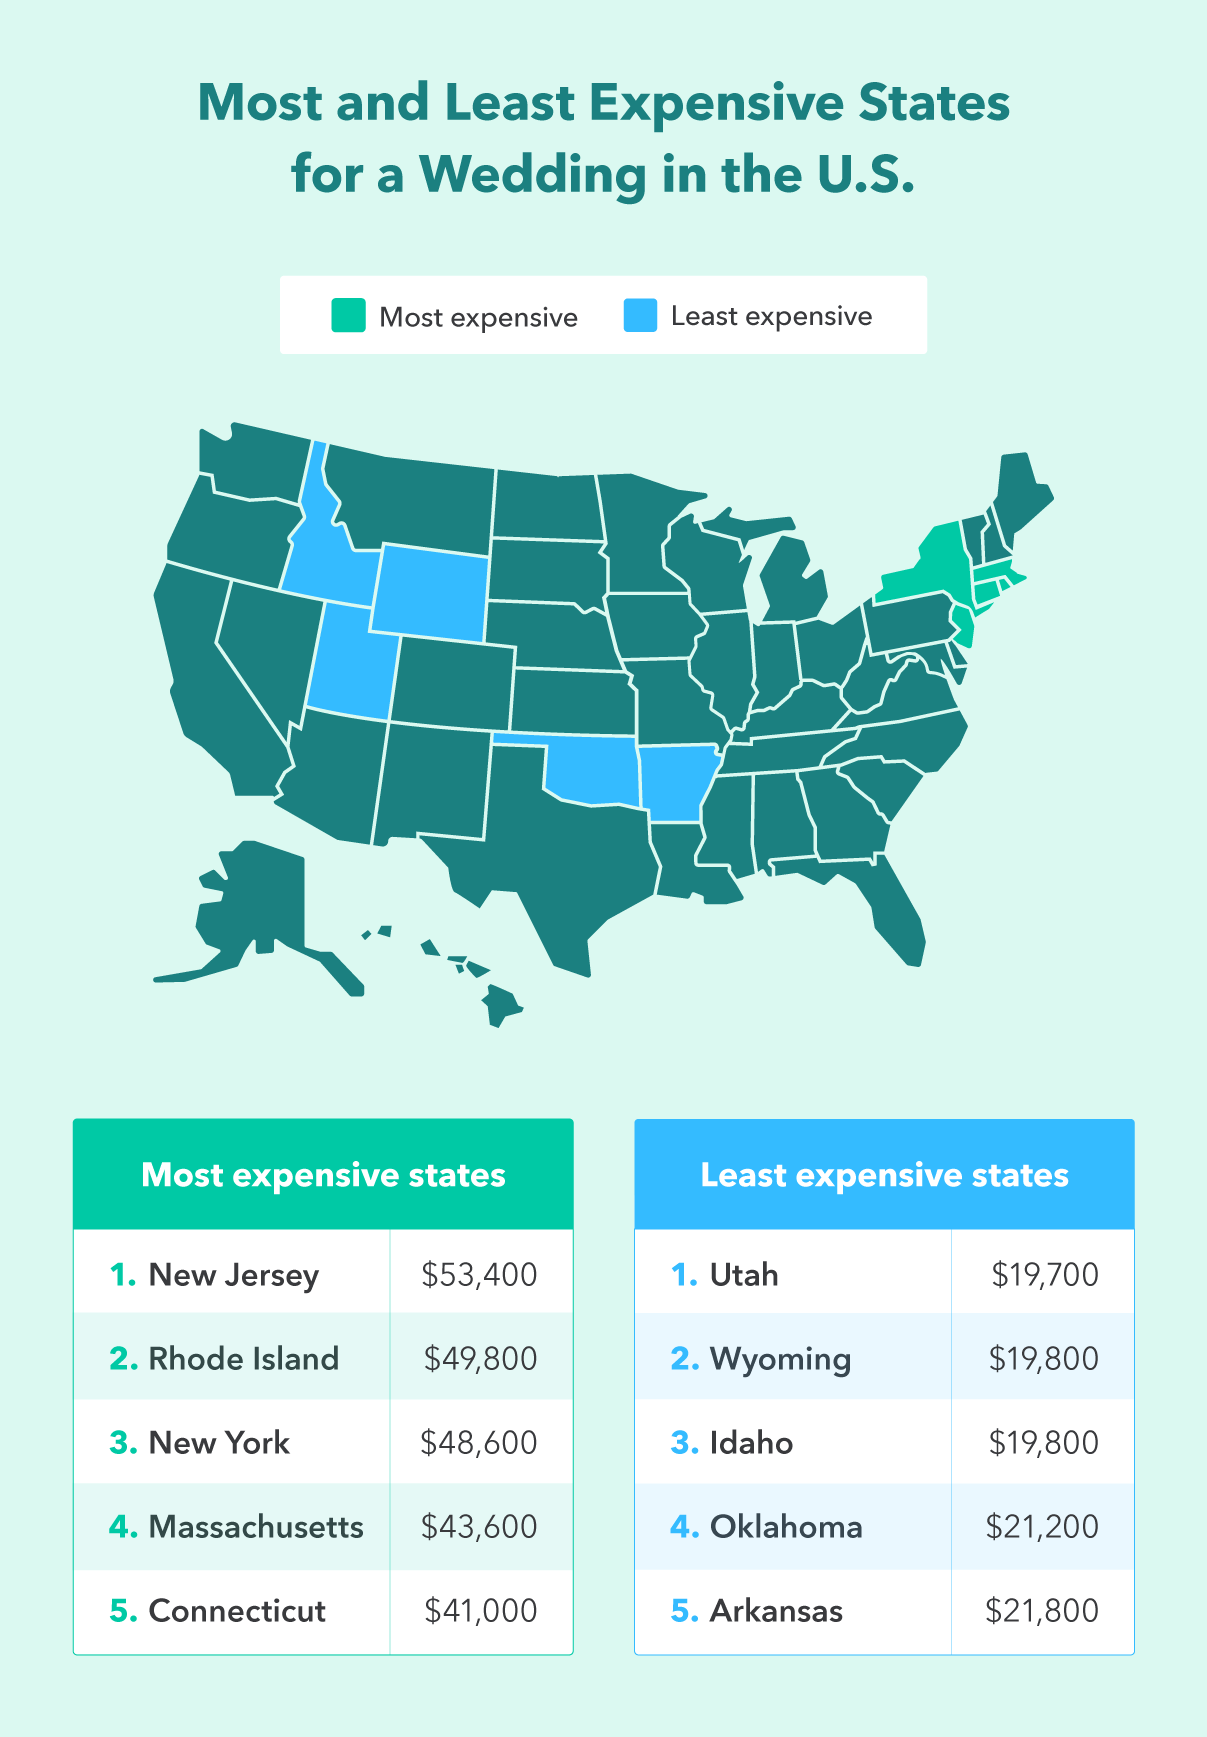 A graphic lists what are most and least expensive states for a wedding in the U.S, to help when using the wedding budget calculator. 